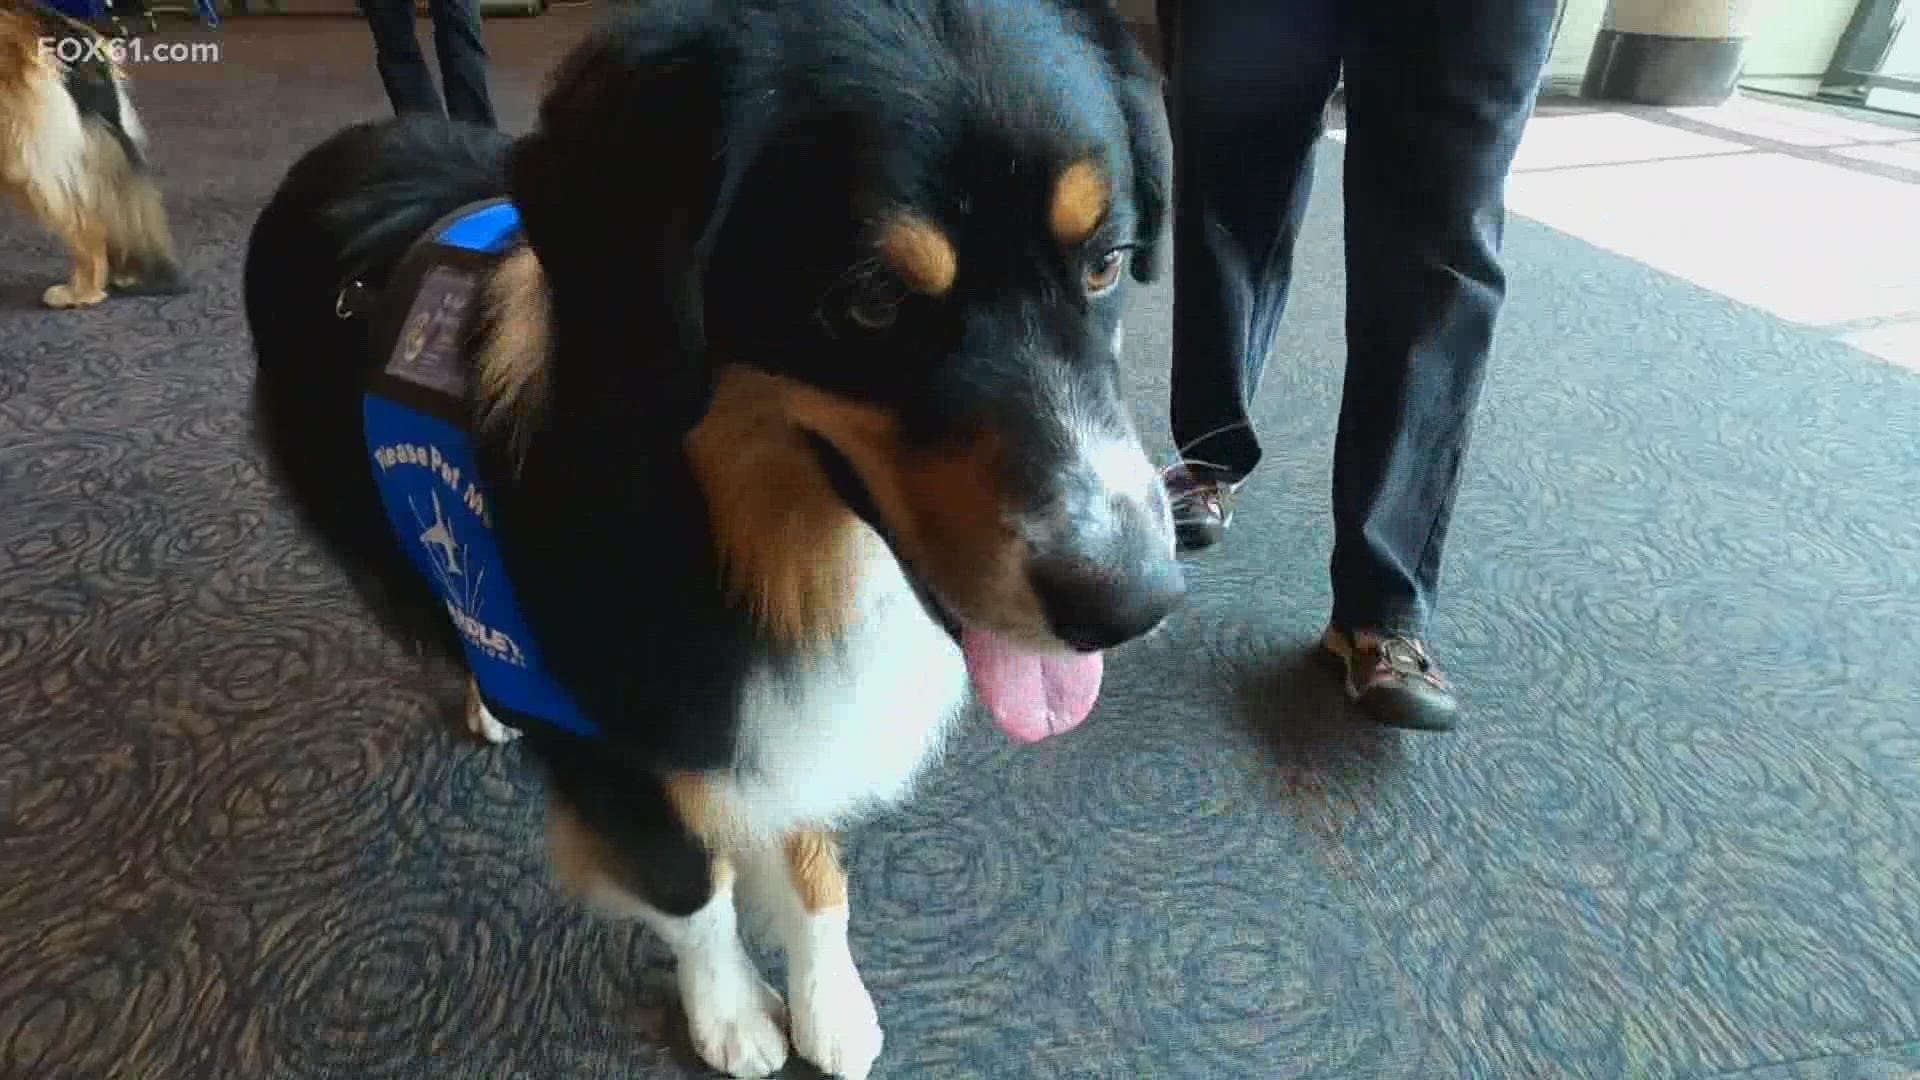 The Bradley Buddies program began at the airport in 2017 with just two dog and handler teams – that has grown to 17 teams